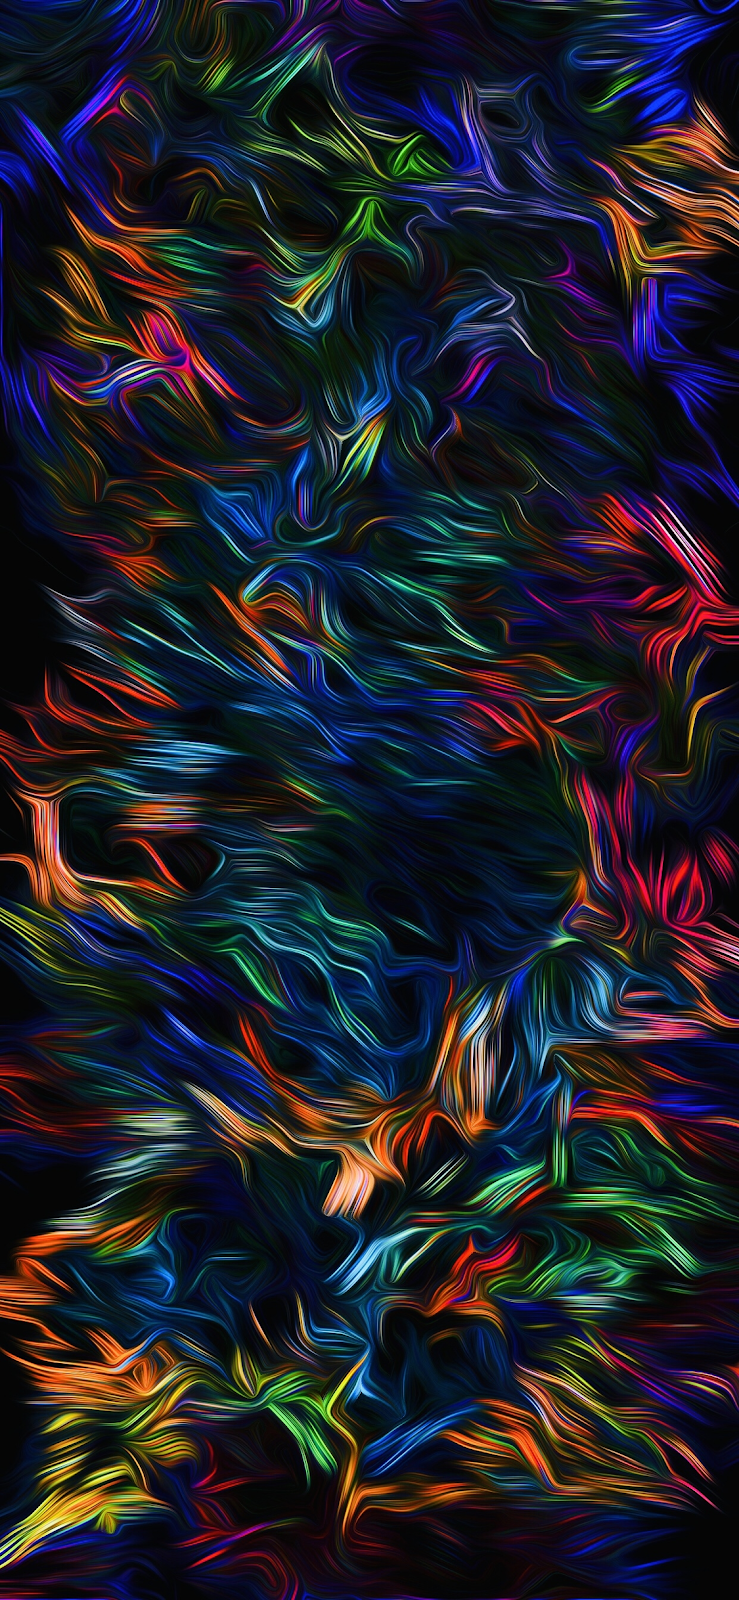 Abstracted ART (iPhone X XS XSMAX XR) #wallpaper #iphone #android # Background #followme. Abstract Wallpaper, Abstract Iphone Wallpaper, Abstract